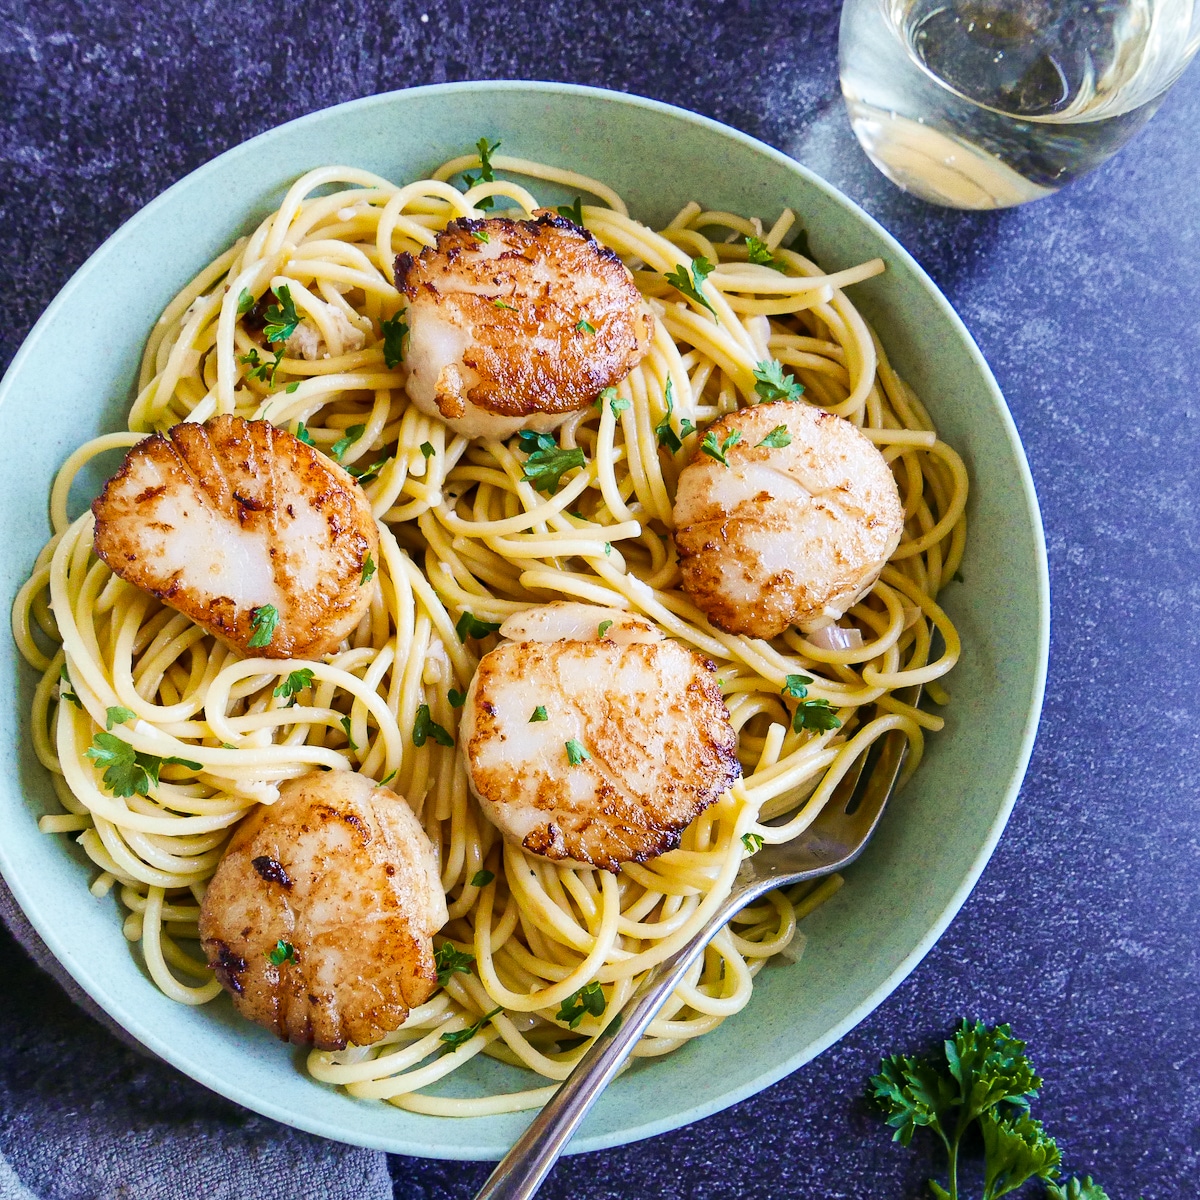 Seared scallops and pasta plated in a bowl with a fork.